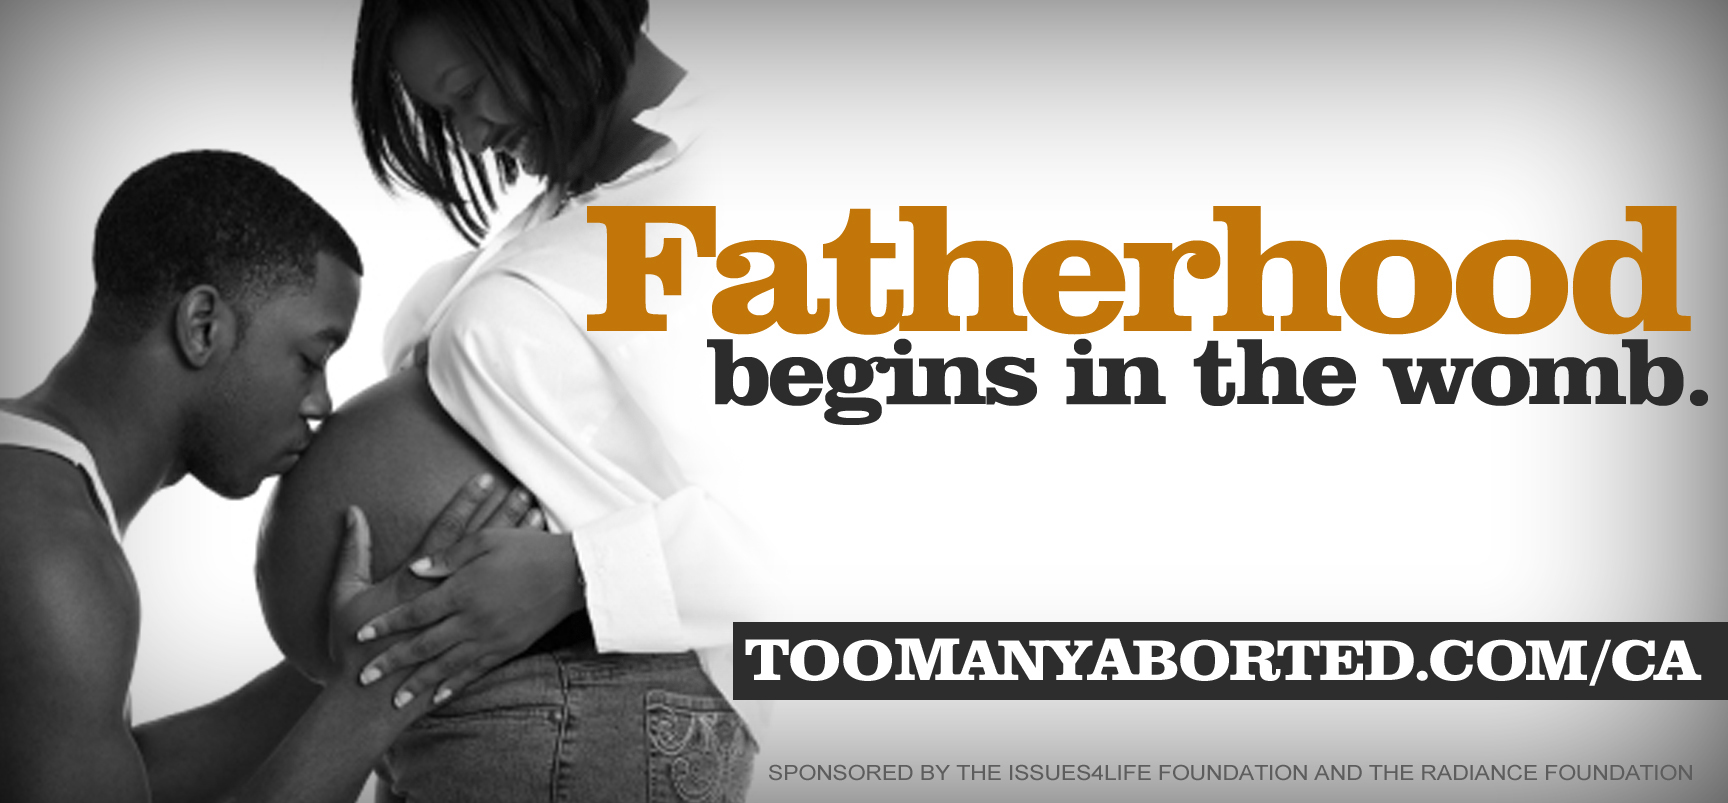 Radiance Foundation's "Fatherhood begins in the womb" billboard campaign for California